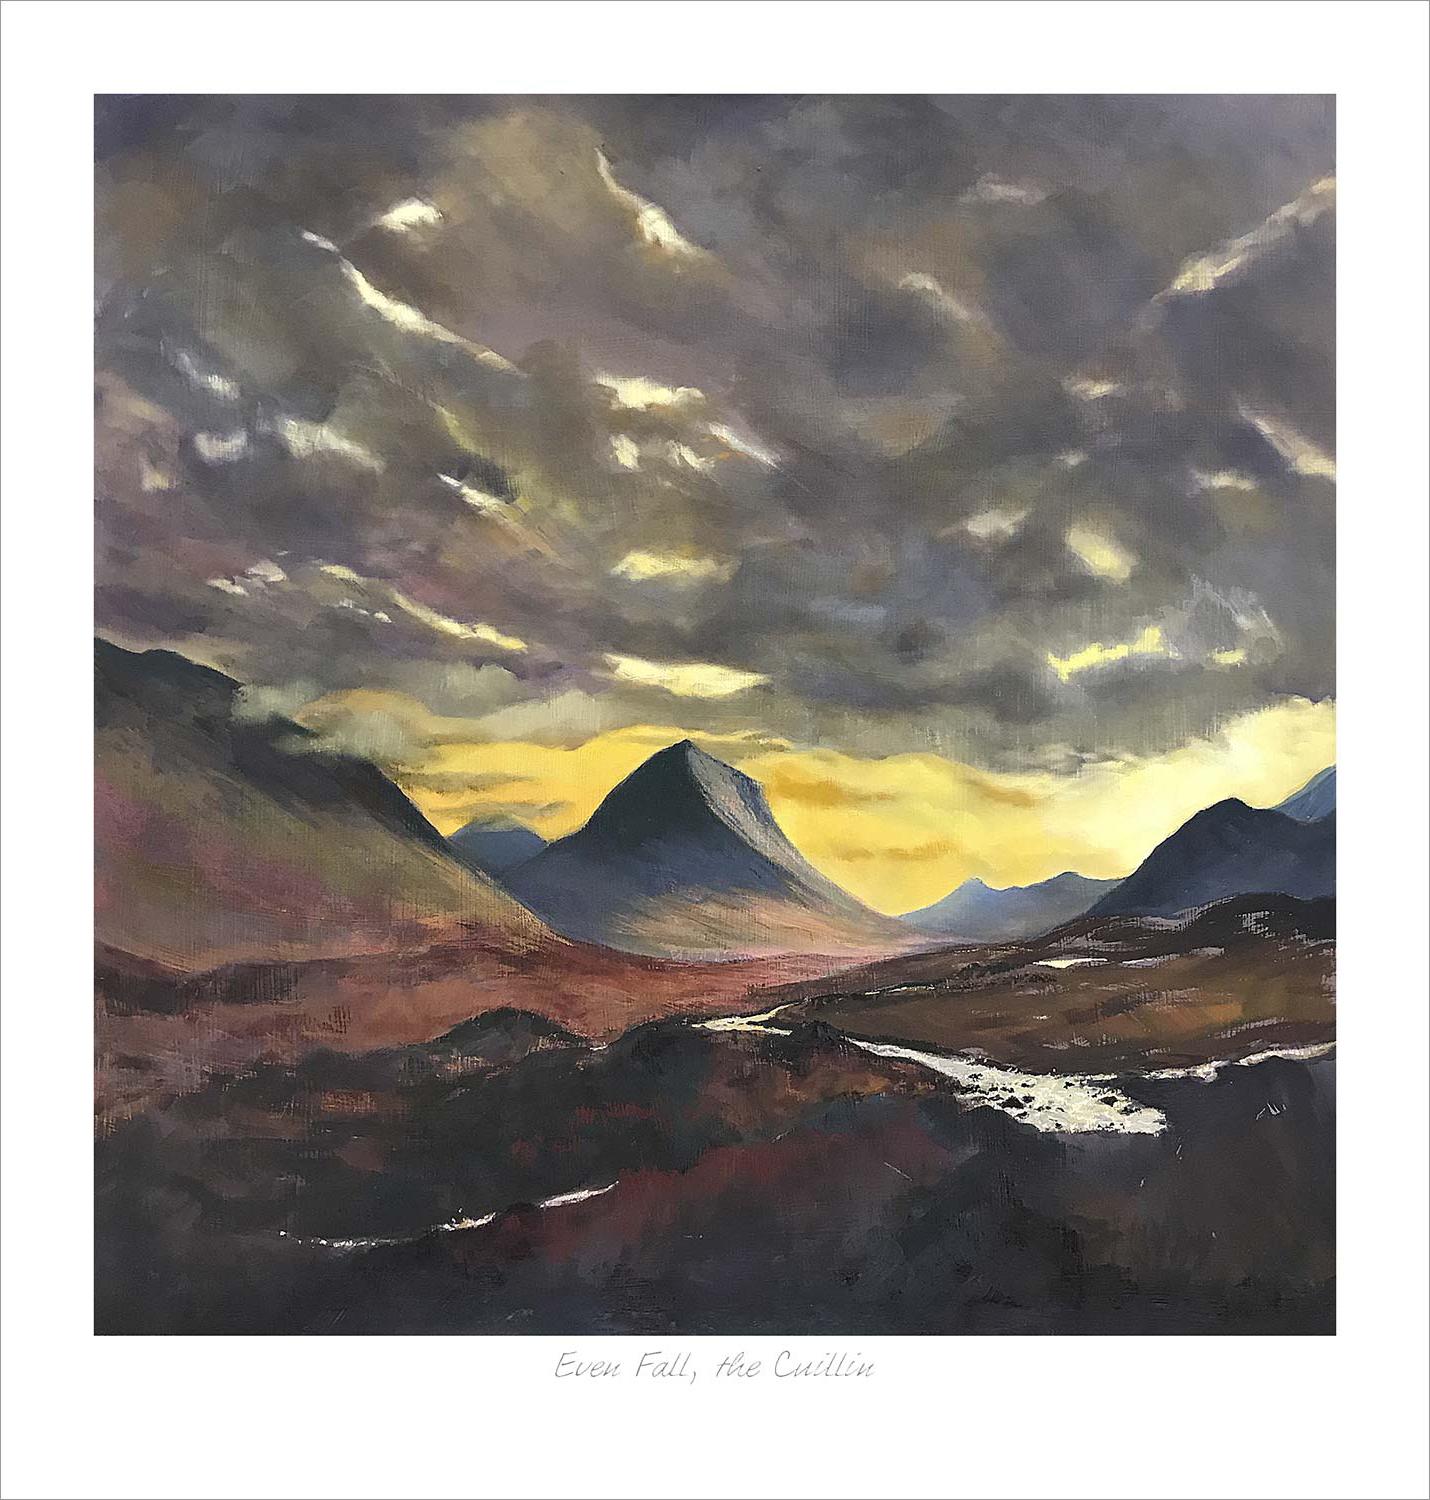 Even Fall the Cuillin Art Print from an original painting by artist Margaret Evans